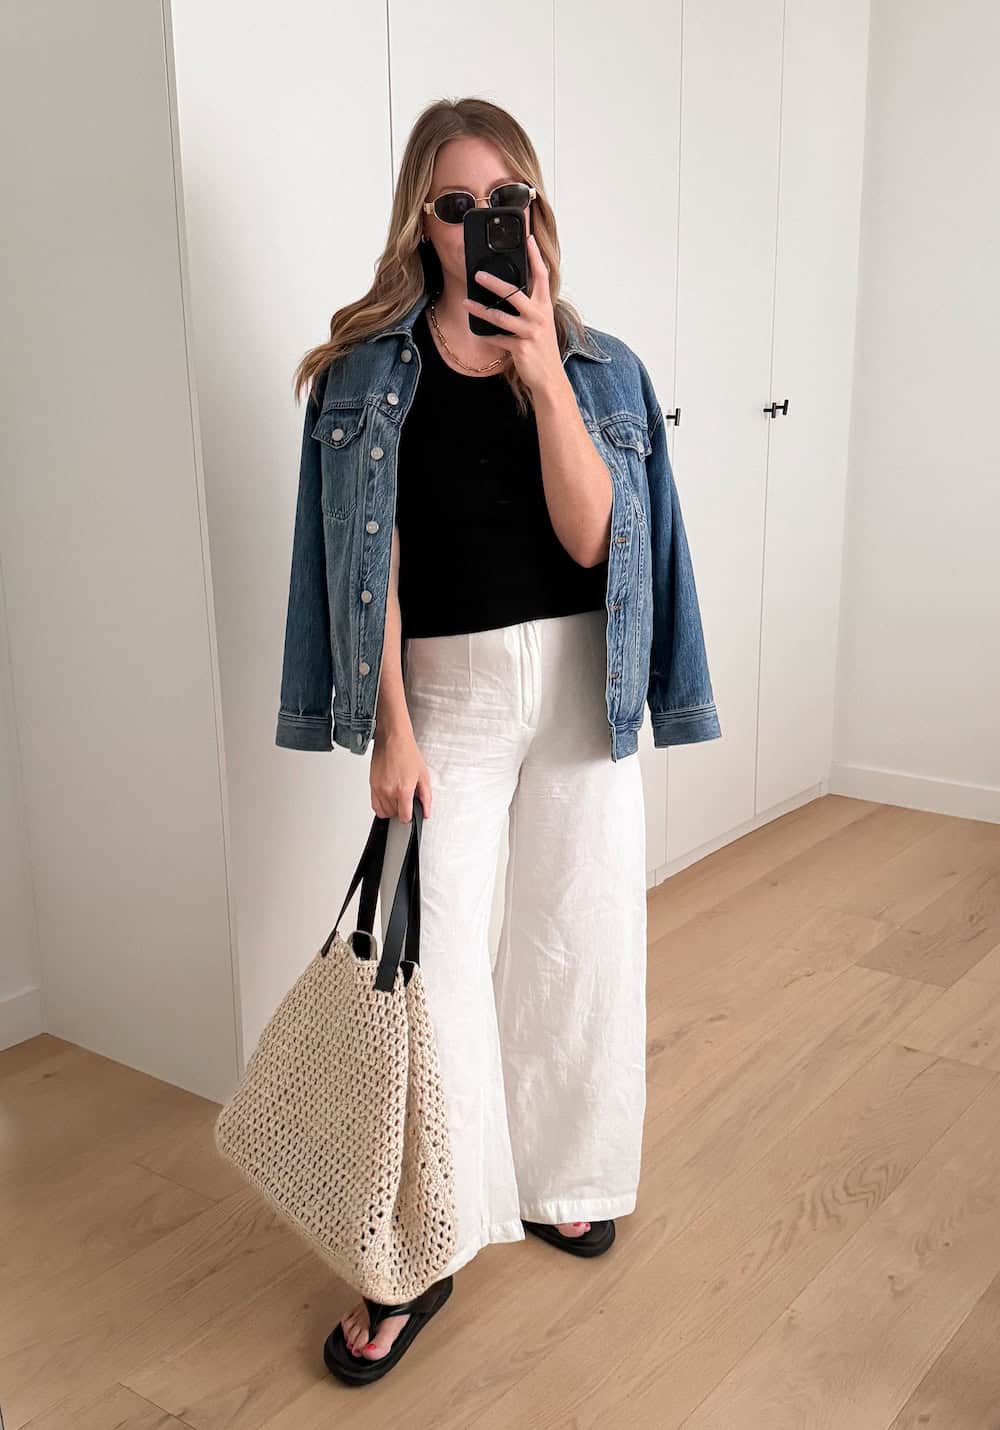 Christal wearing white, wide leg pants and a black tank top with a denim jacket.